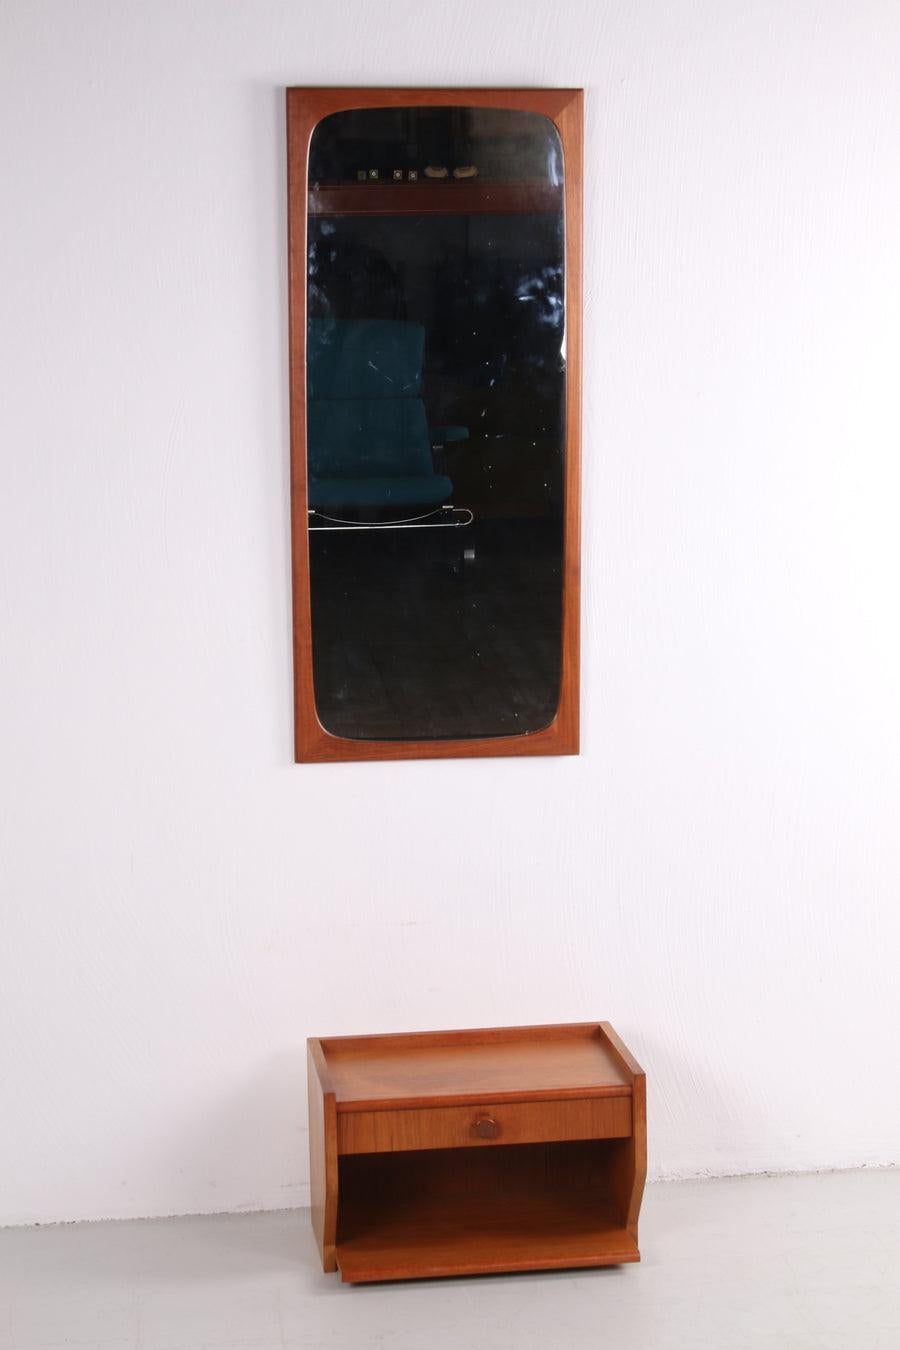 Teak Wooden Hallway Set Mirror with Floating Dresser, 1960
Condition: In good condition
Beautiful unique set for on the wall.
Sleek Danish teak mirror with special raised edge & stylish floating wall cabinet.
Period: 1960s.
Country of origin :